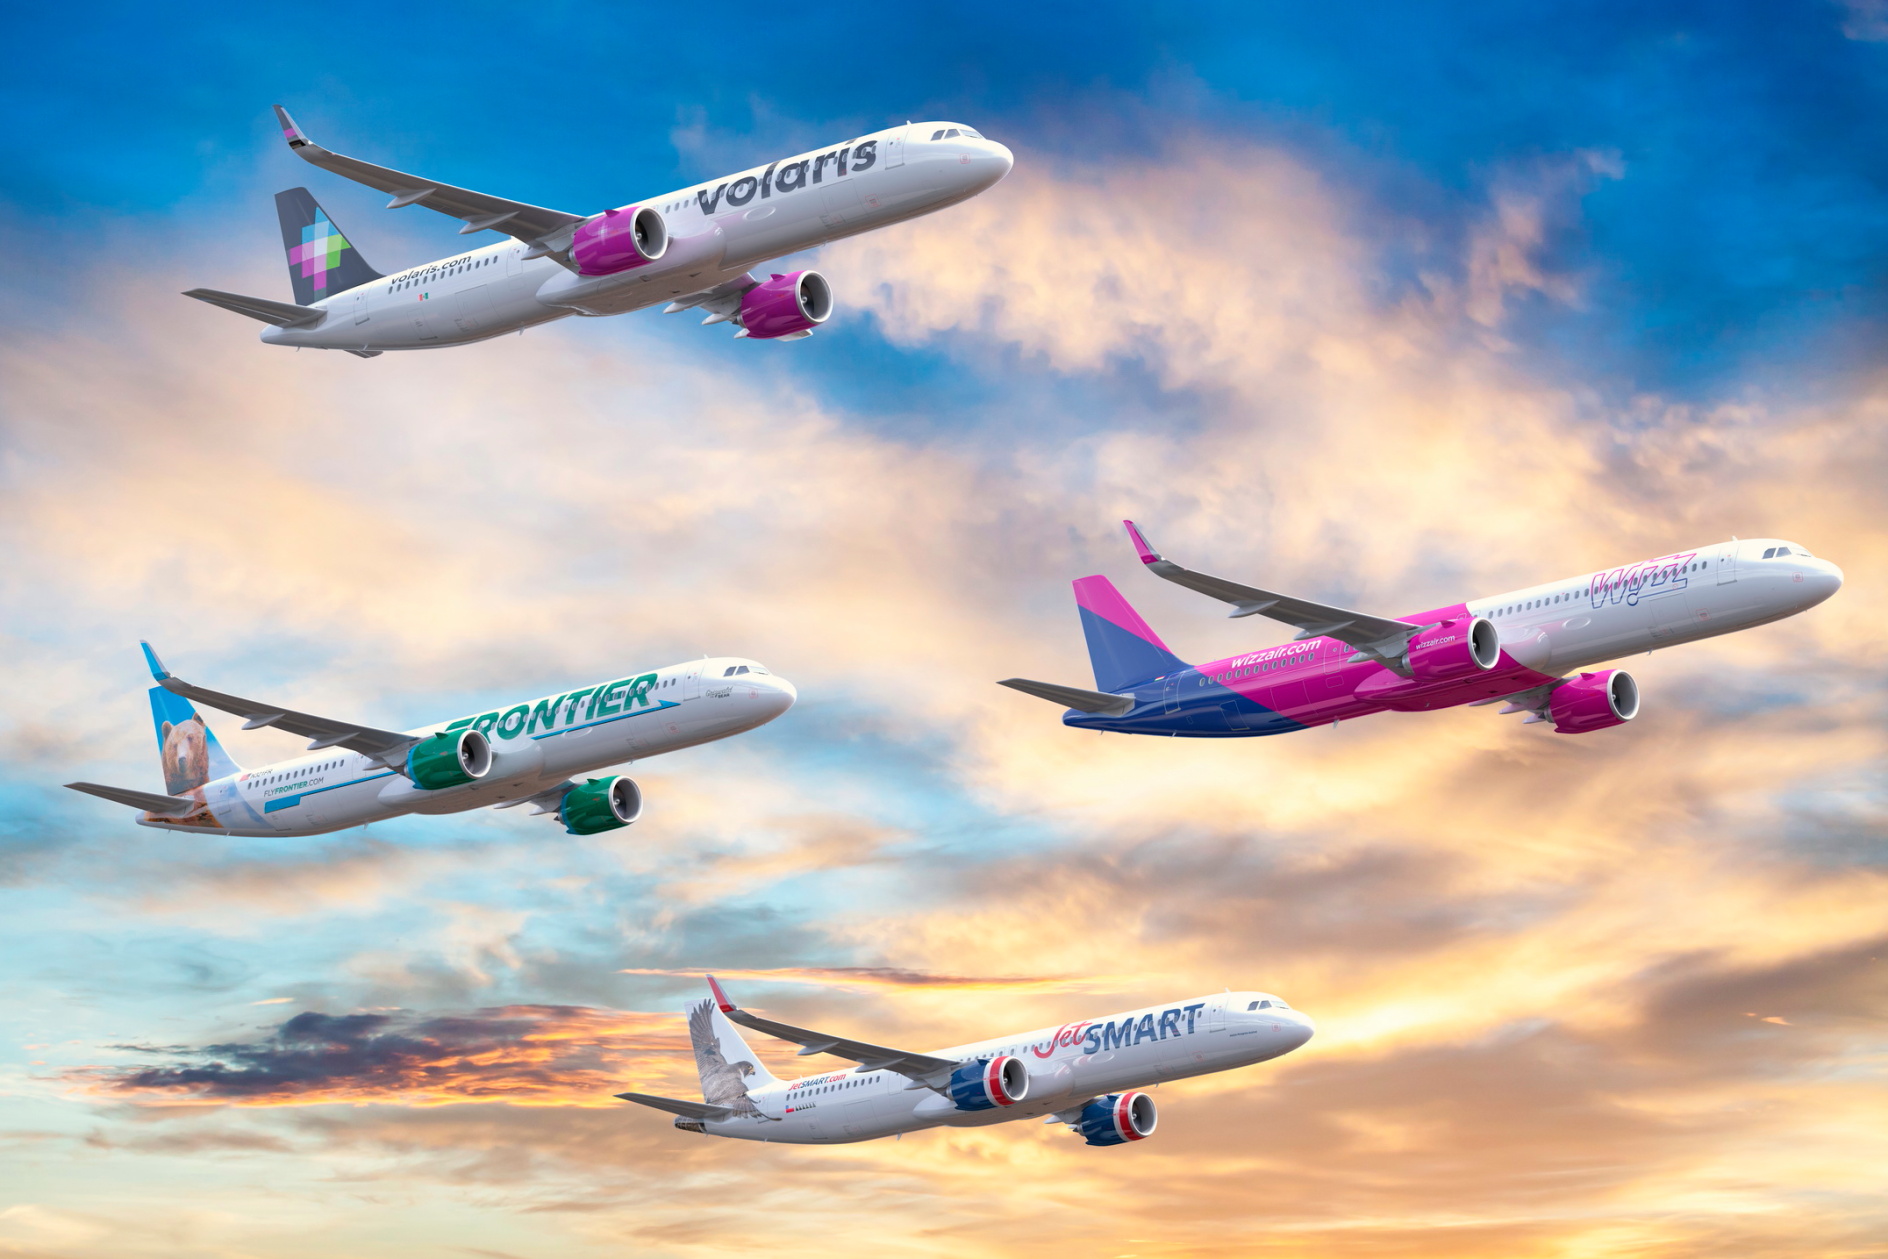 Indigo Partners portfolio airlines - Wizz Air (Hungary), Frontier (United States), Volaris (Mexico) and JetSMART (Chile, Argentina) - have ordered 255 Airbus A321neo Family aircraft under a joint agreement.. Click to enlarge.